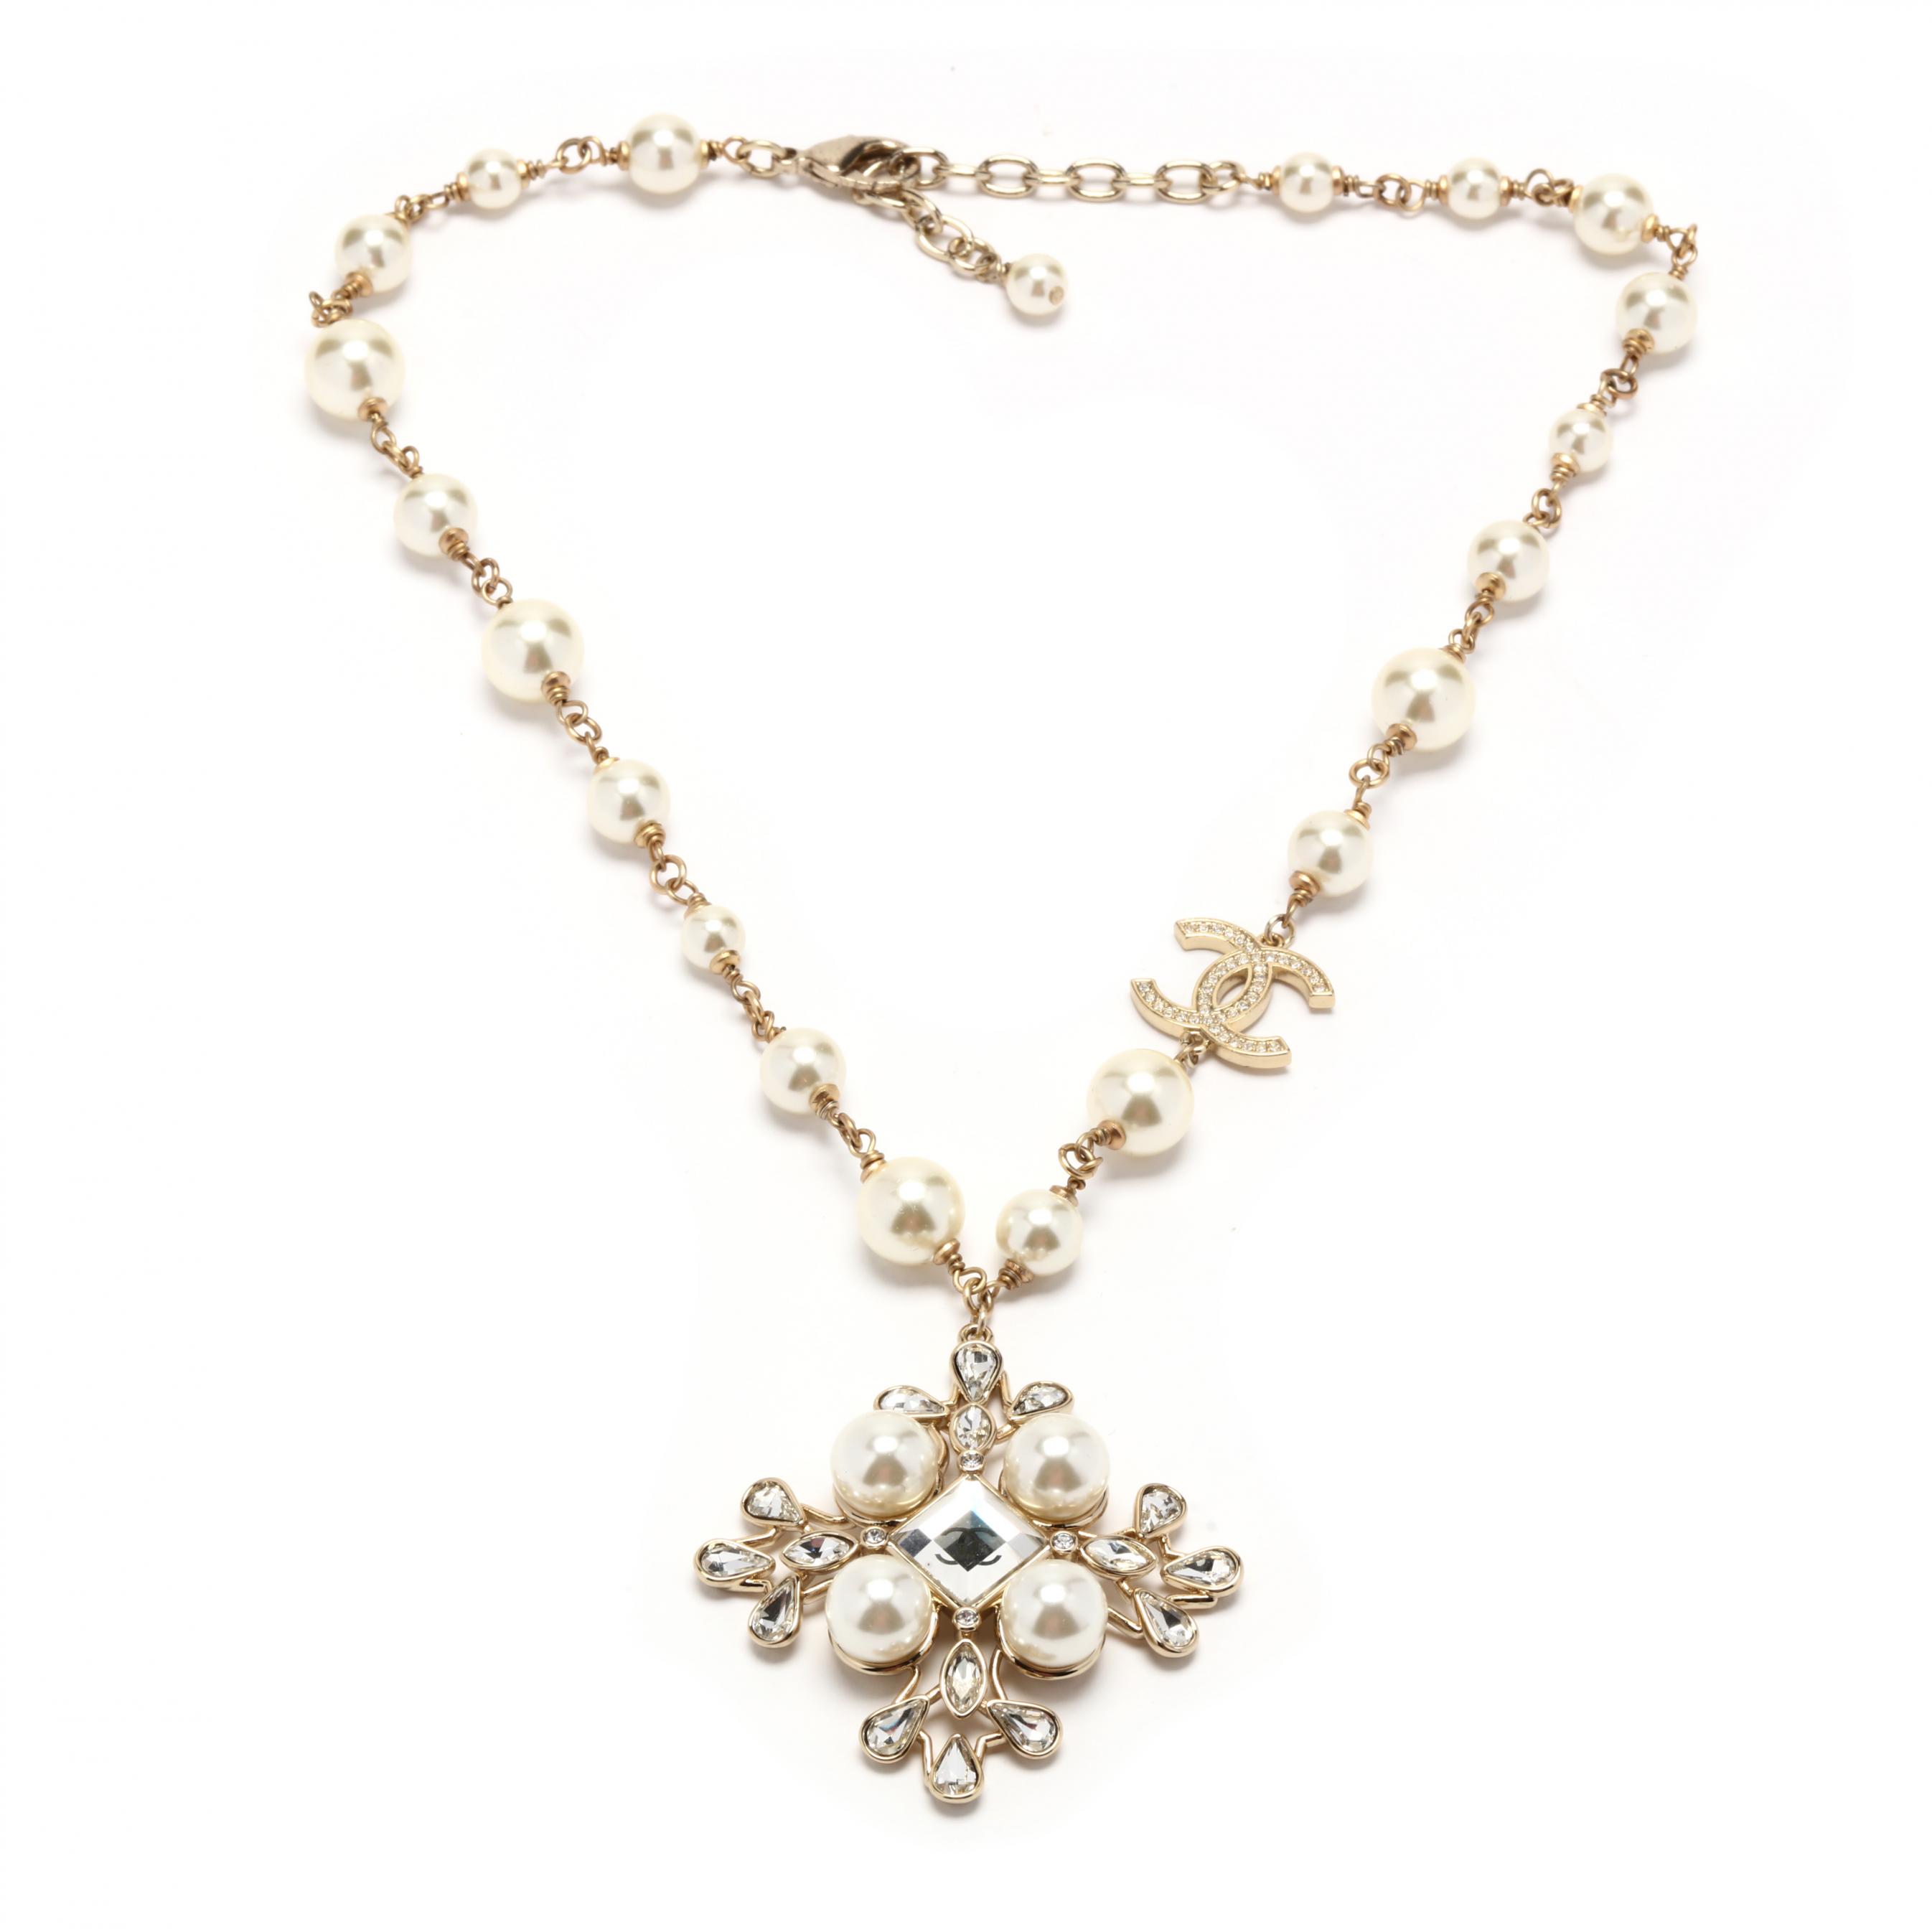 Sold at Auction: A Chanel CC Crystal Faux Pearl Pendant Necklace